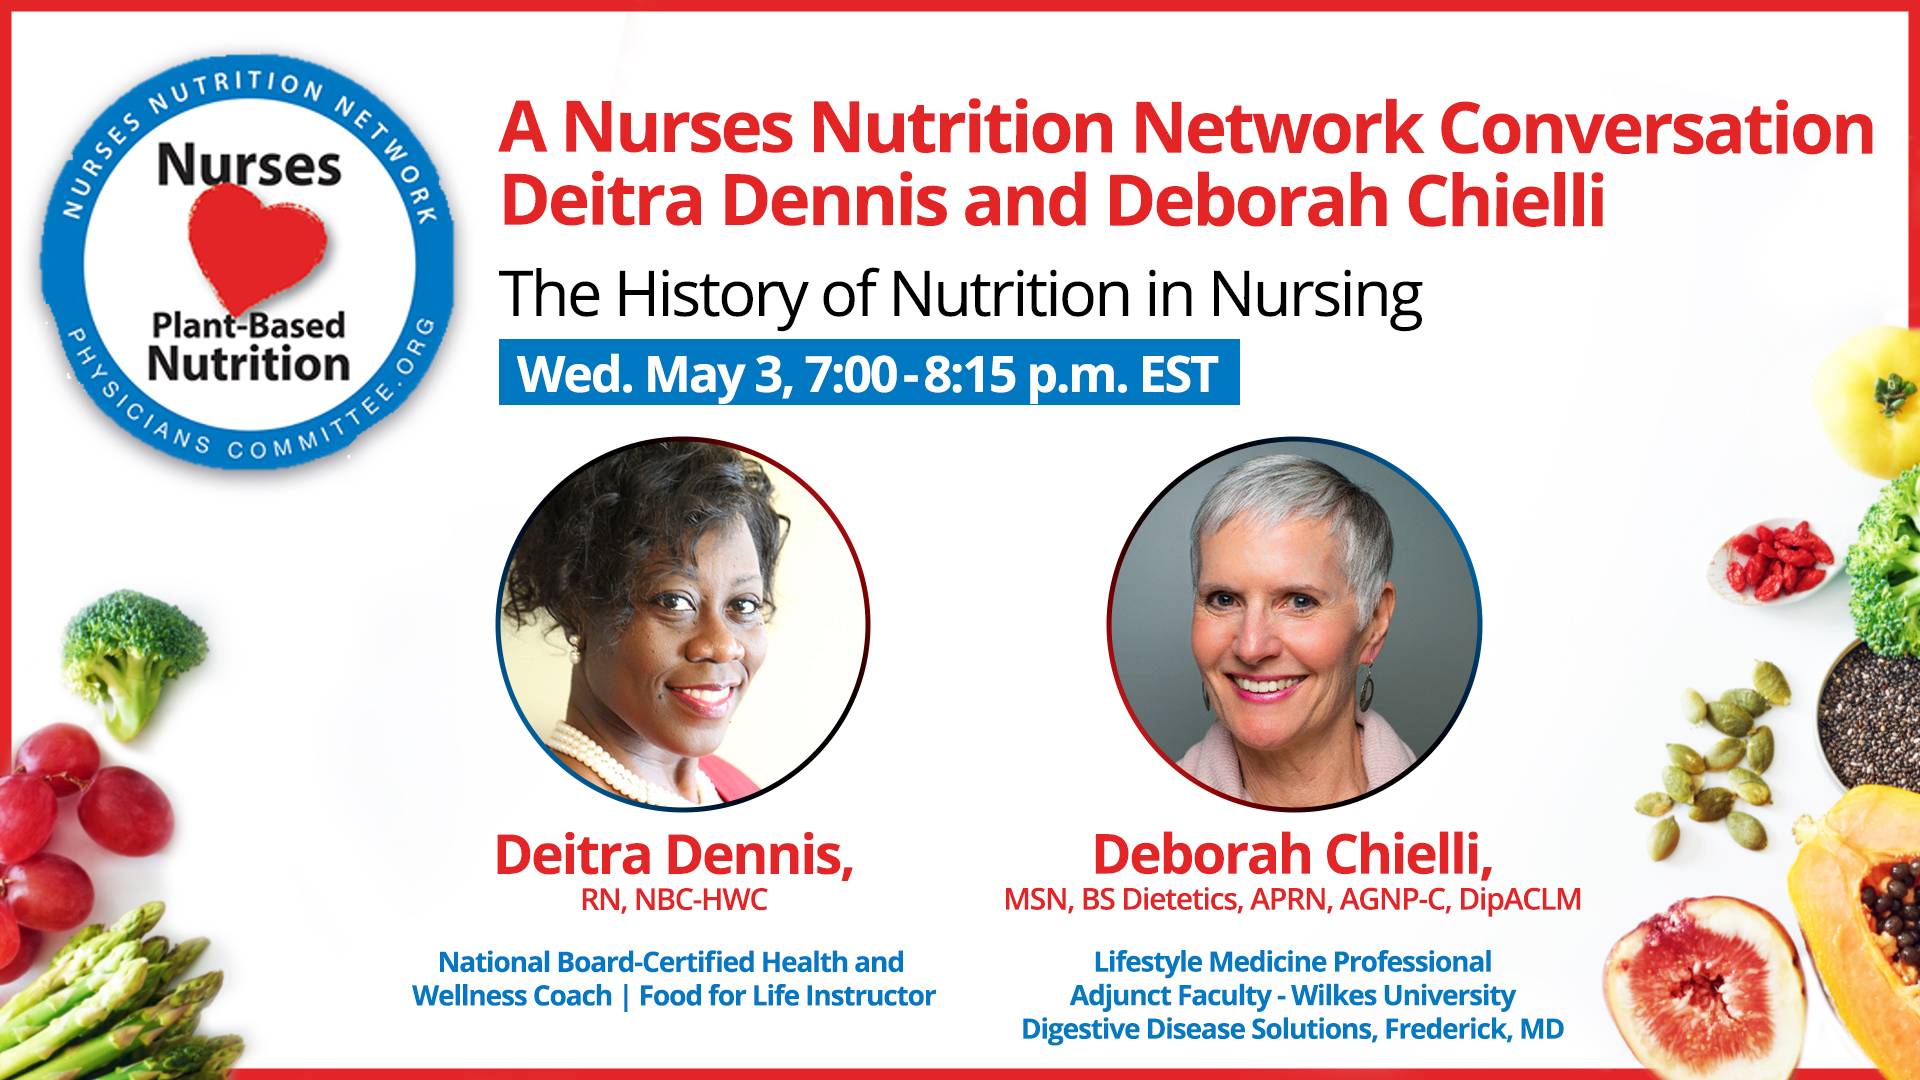 A Nurses Nutrition Network  Conversation on the History of Nutrition in Nursing